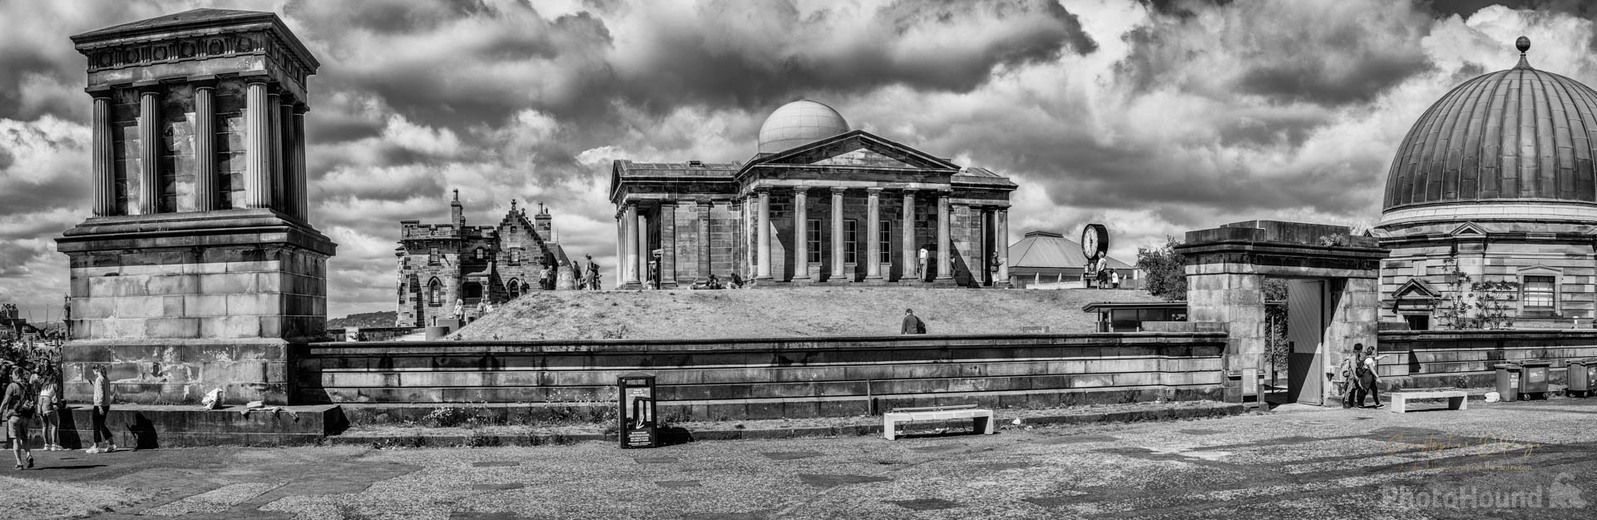 Image of Calton Hill by Chris Page